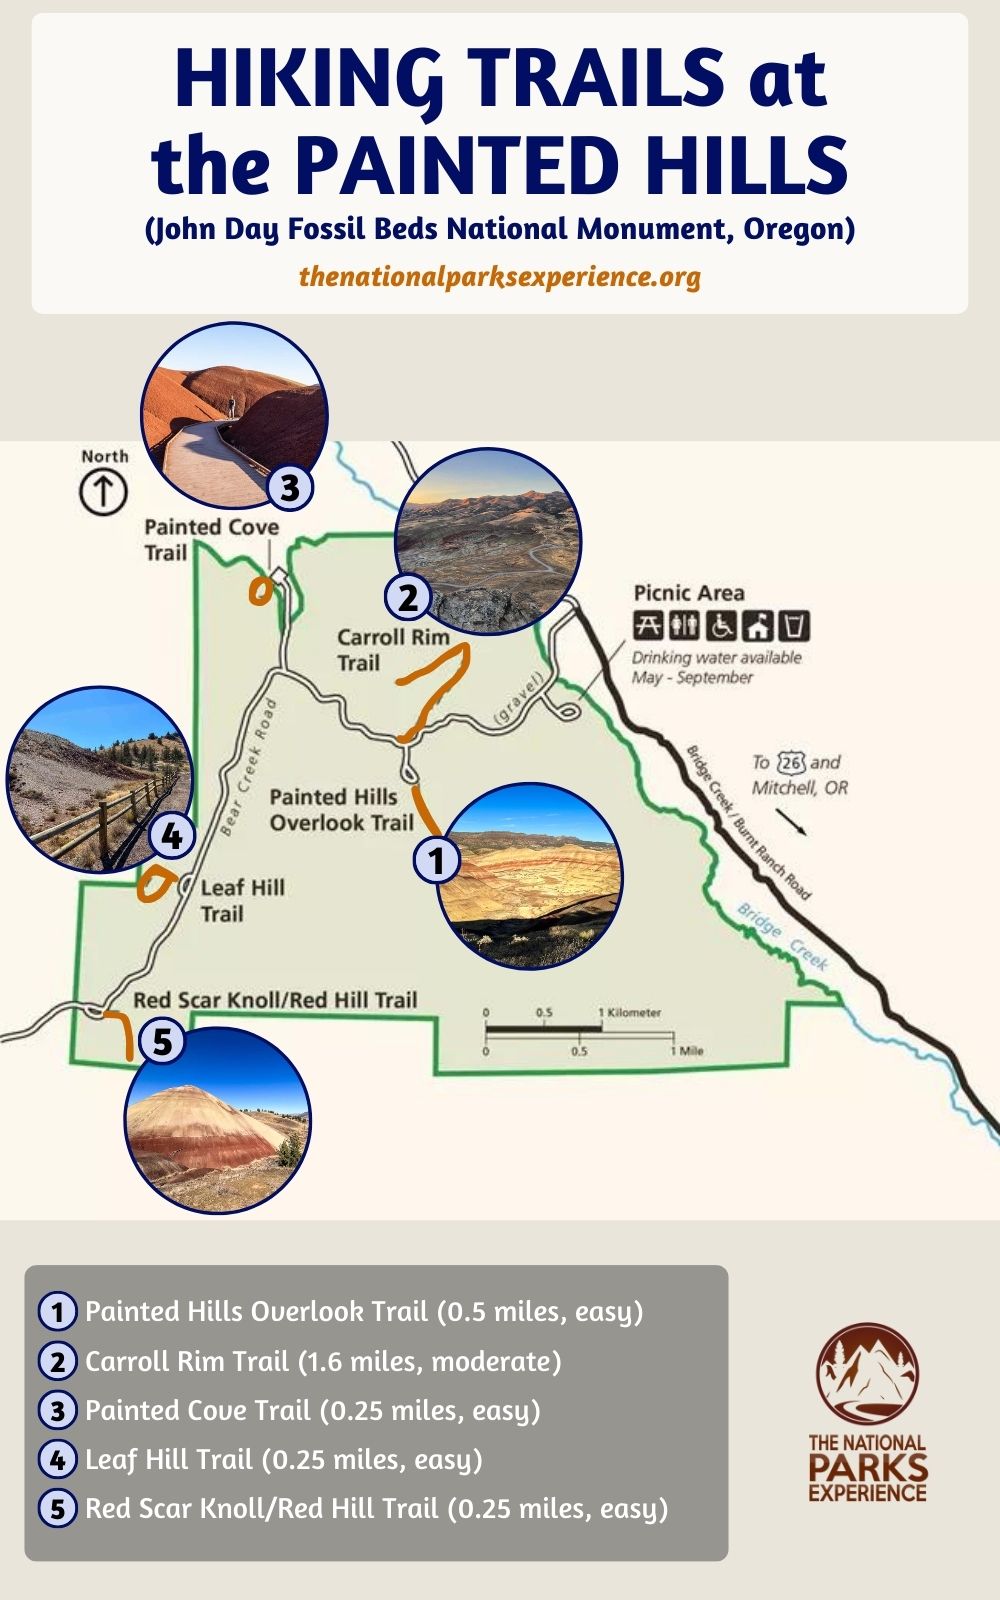 Map of the Hiking Trails at the Painted Hills Unit, John Day Fossil Beds National Monument